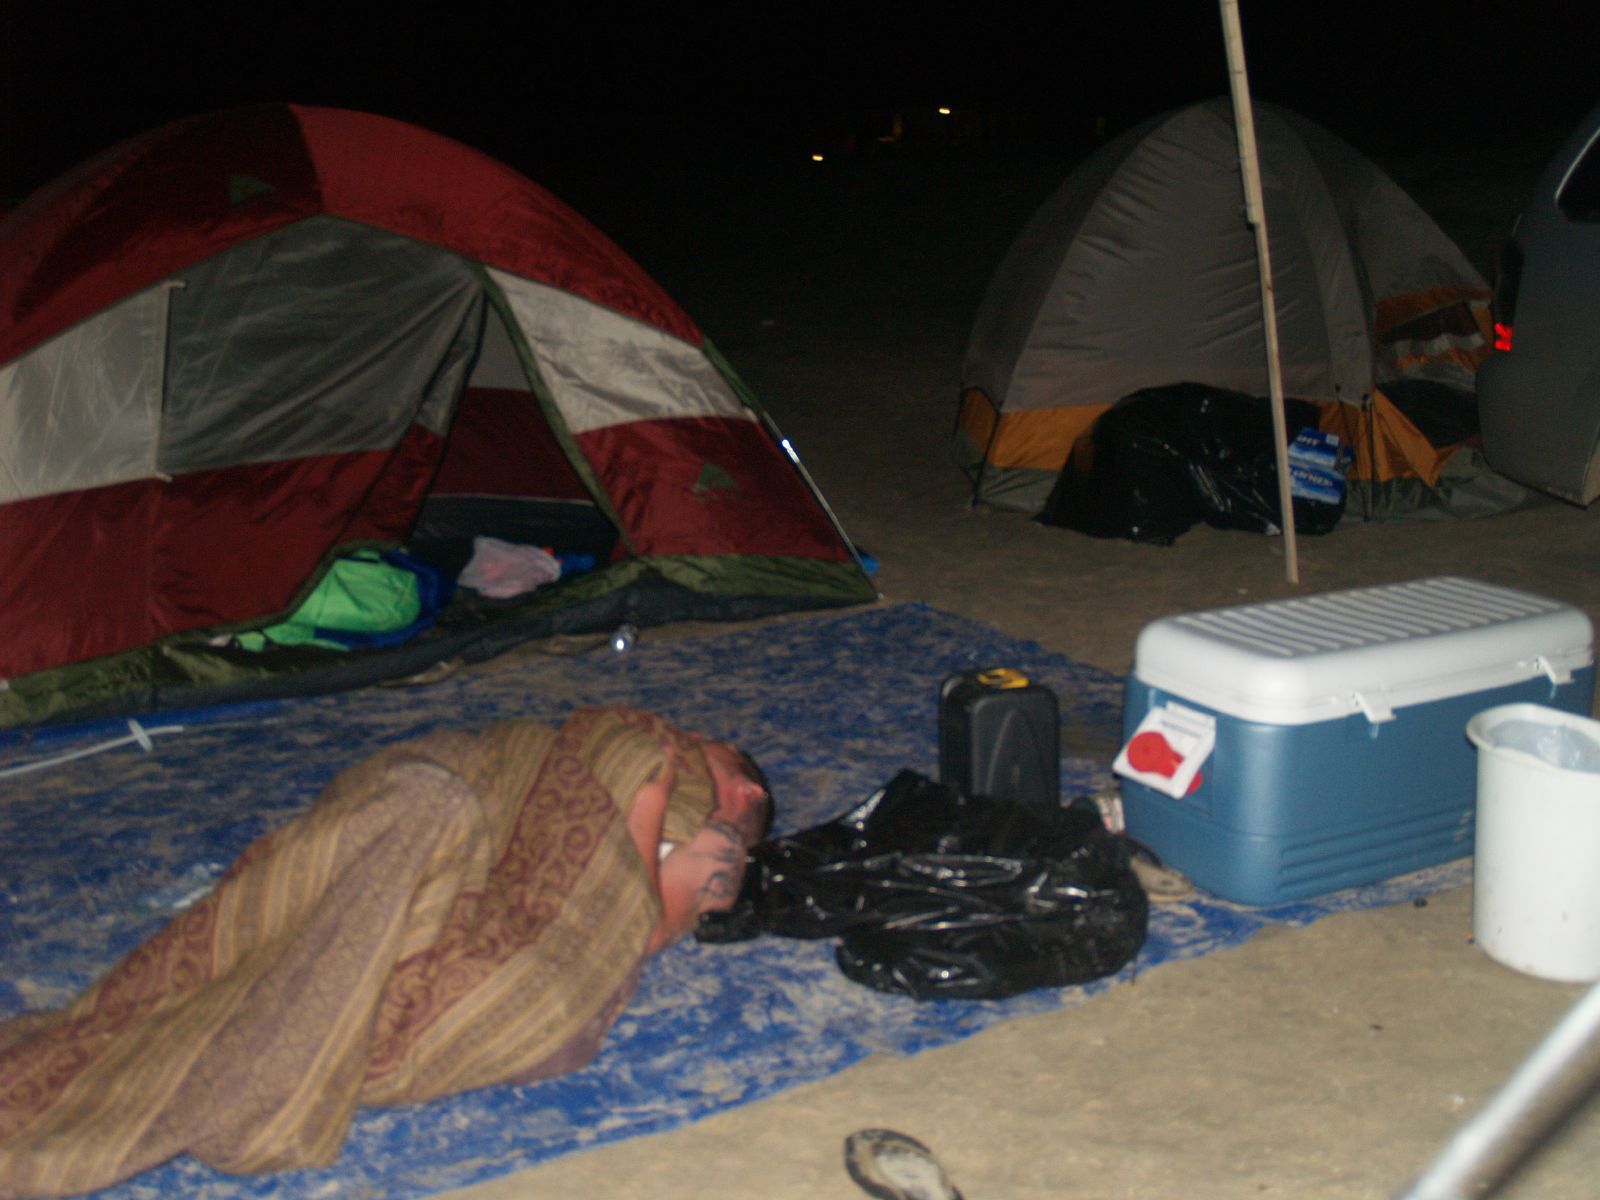 a man sleeping on the ground in front of several tents